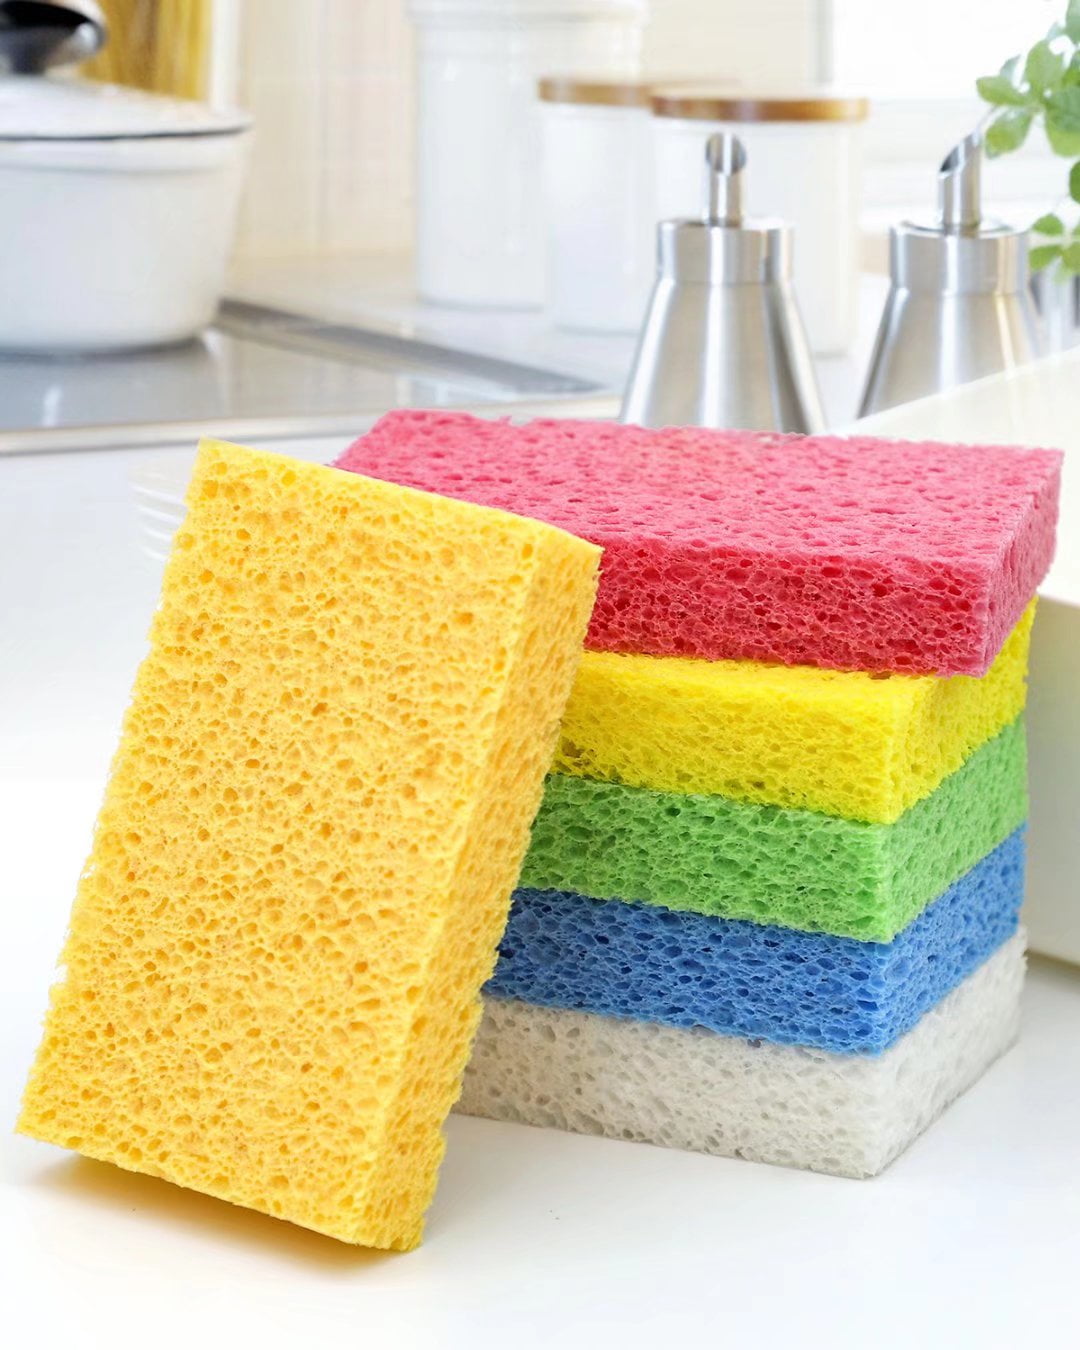 Set of 2 Premium Paperless Kitchen Dish Wash Scrubs – Sponge Scour Pads Made of 100% Natural Organic Fibers w/ Non-Toxic Coat – Non-Scratch Surface